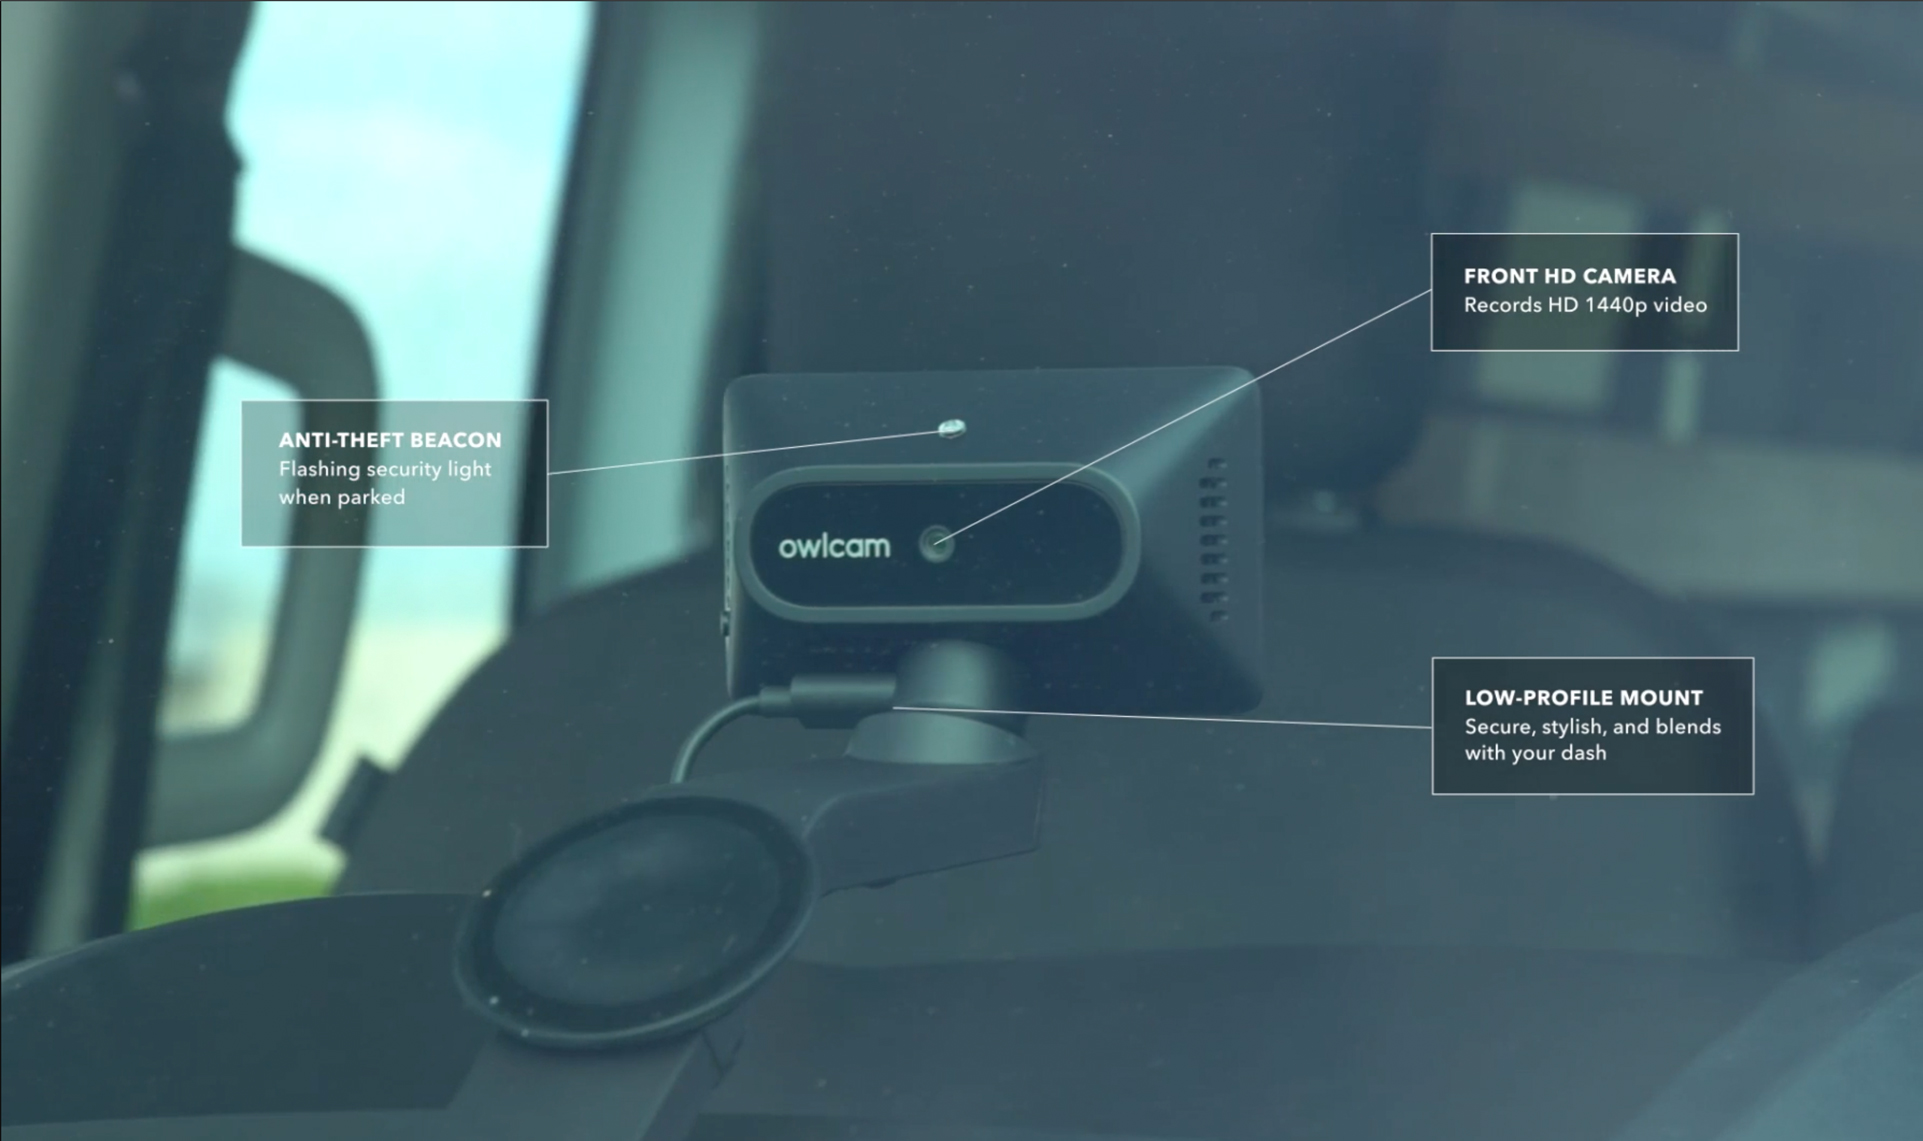 Rear view of Owlcam which includes feature information. Features listed are anti-theft beacon, front HD camera, and a low-profile mount.